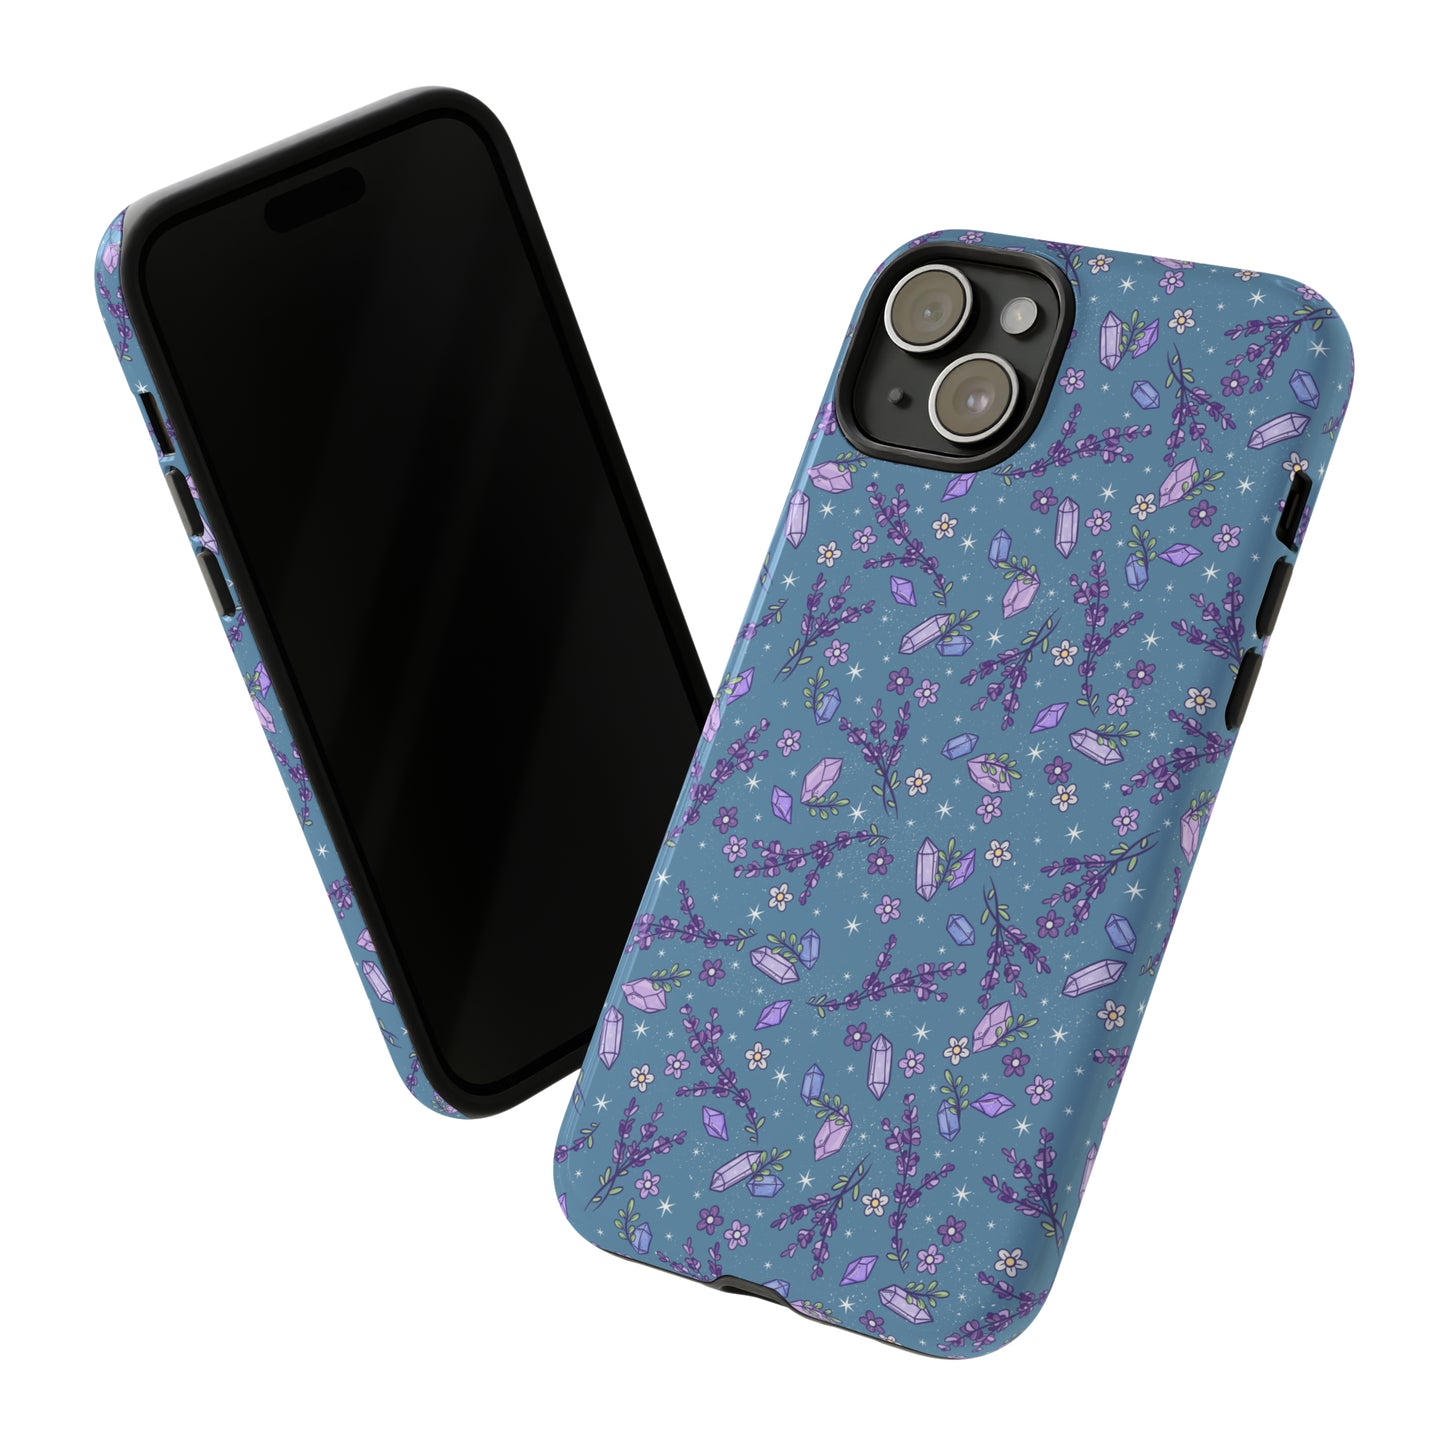 Lavander and crystals Tough Phone Case for Iphones, Samsungs, and Google phones